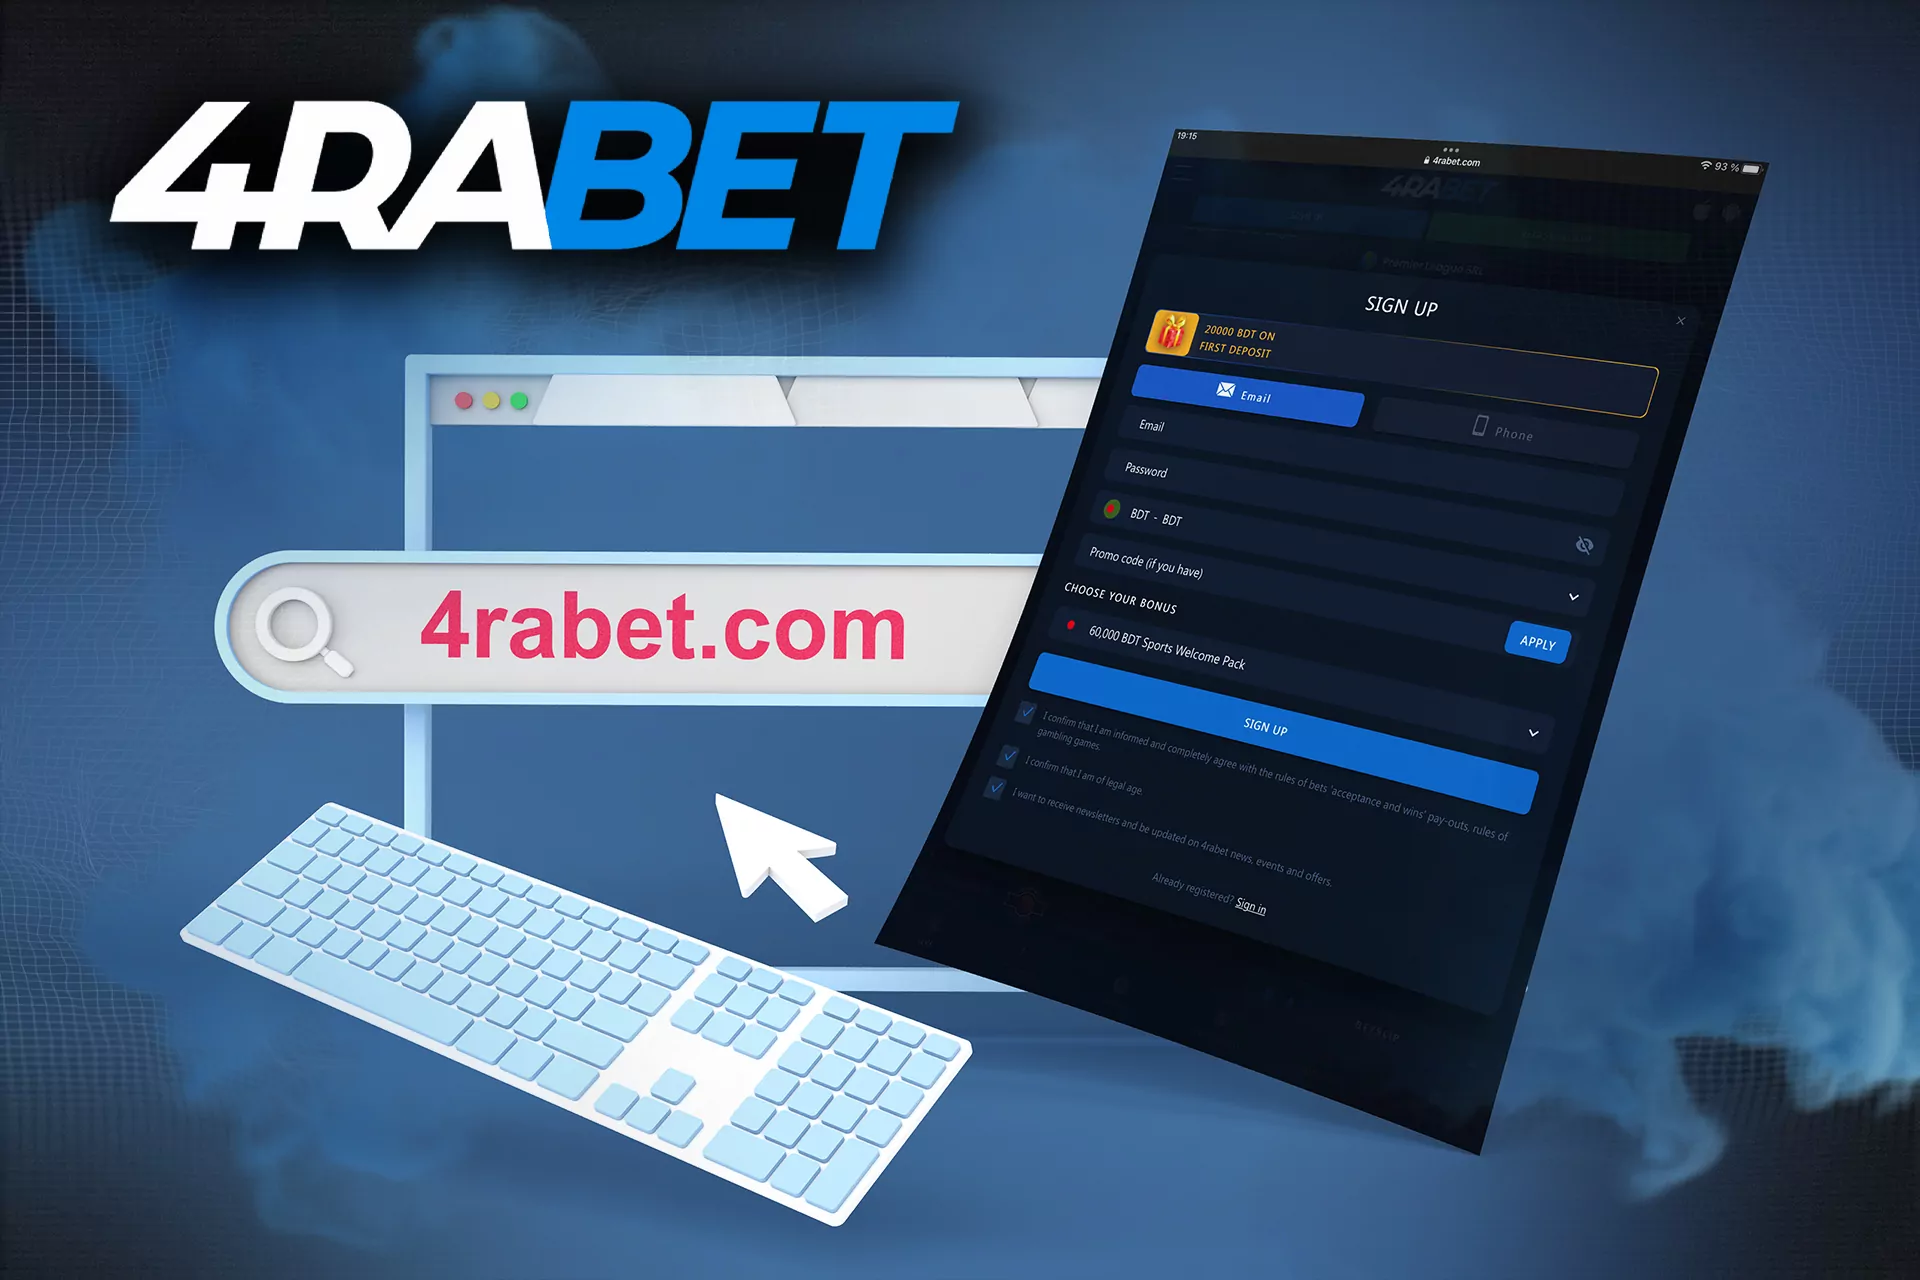 You can open the 4rabet website on your PC via a browser.